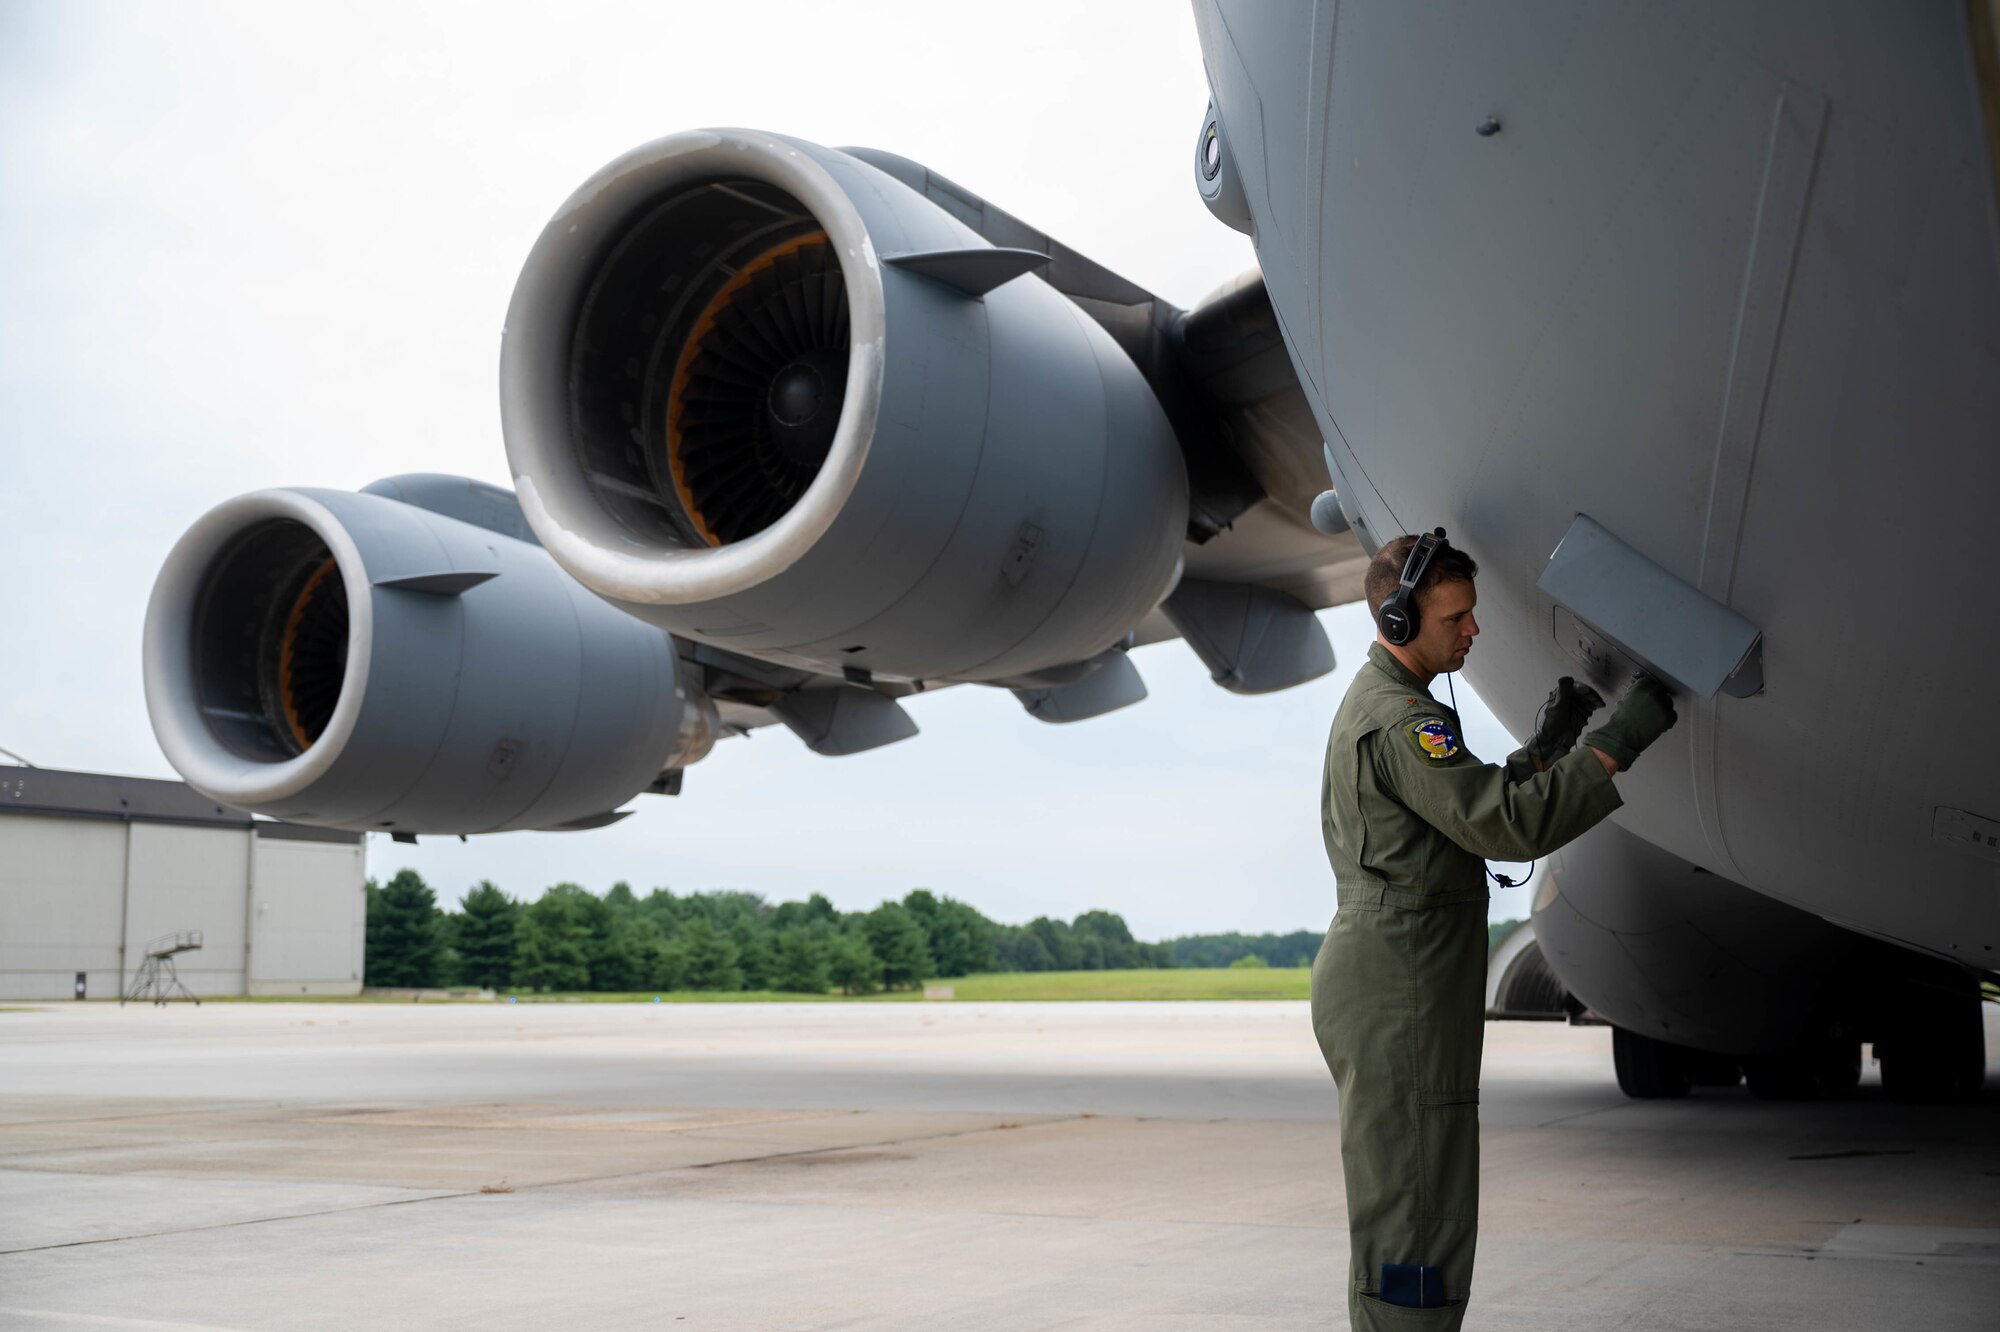 Maj. Daniel Velo, 3rd Airlift Squadron pilot, closes an external power outlet on a C-17 Globemaster III before a local training flight at Dover Air Force Base, Delaware, Aug. 4, 2021. The 3rd AS routinely trains to ensure aircrew operational readiness to support global operations through delivery of time-critical assets. (U.S. Air Force photo by Senior Airman Faith Schaefer)